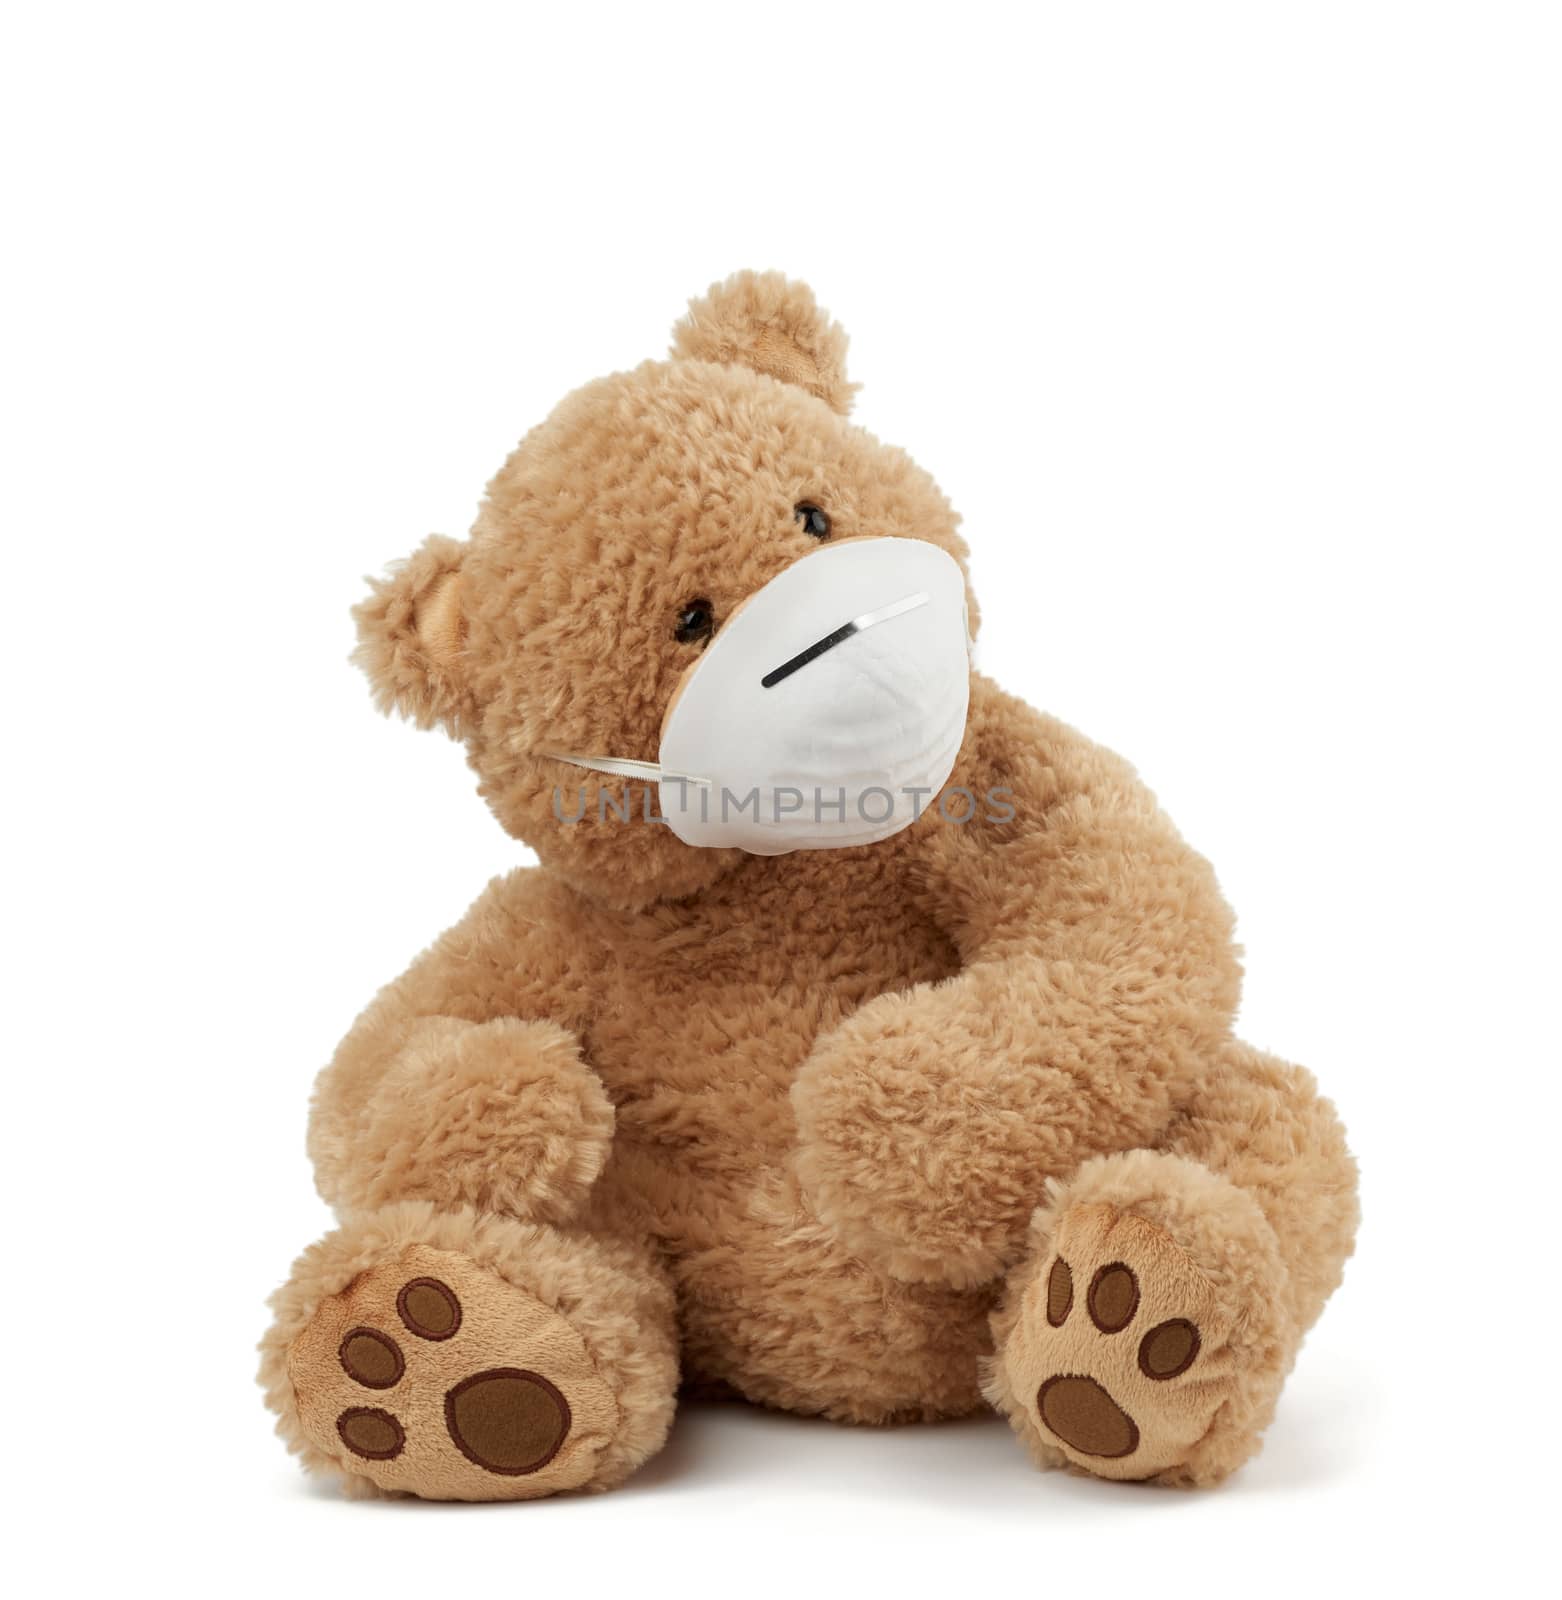 big teddy bear are sitting in medical masks on a white backgroun by ndanko